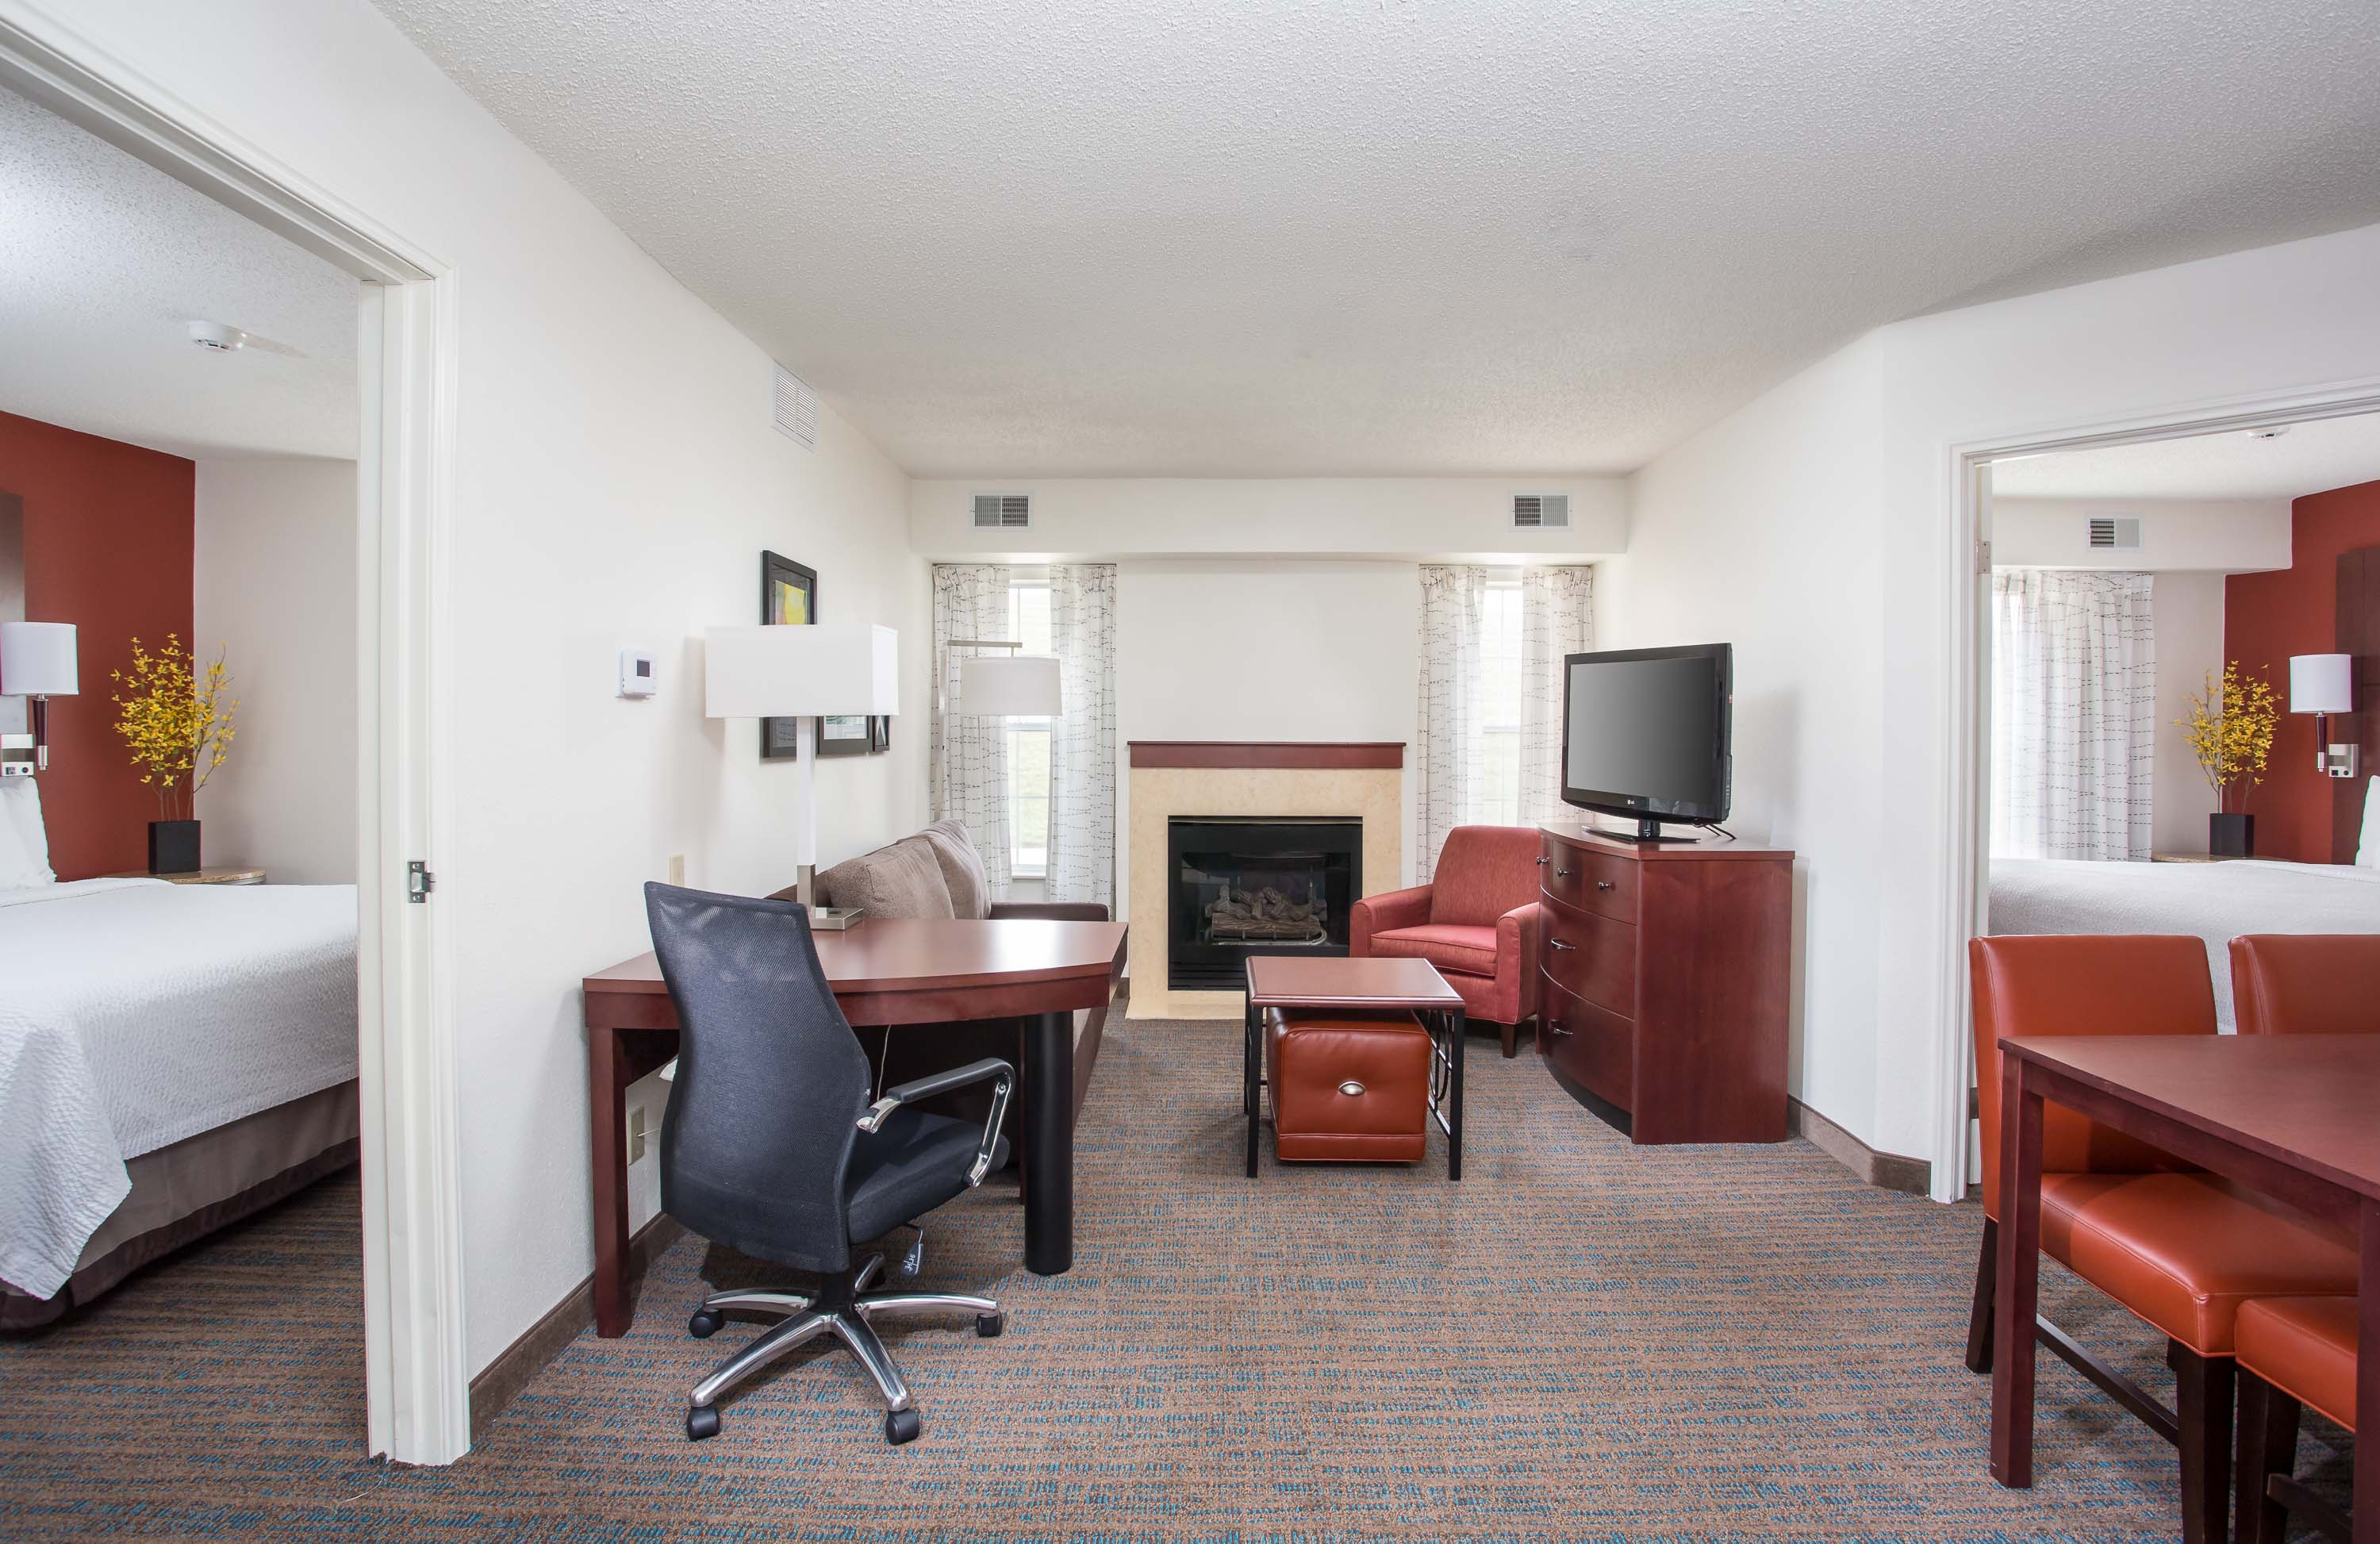 20140417_topeka_two_room_suite_001